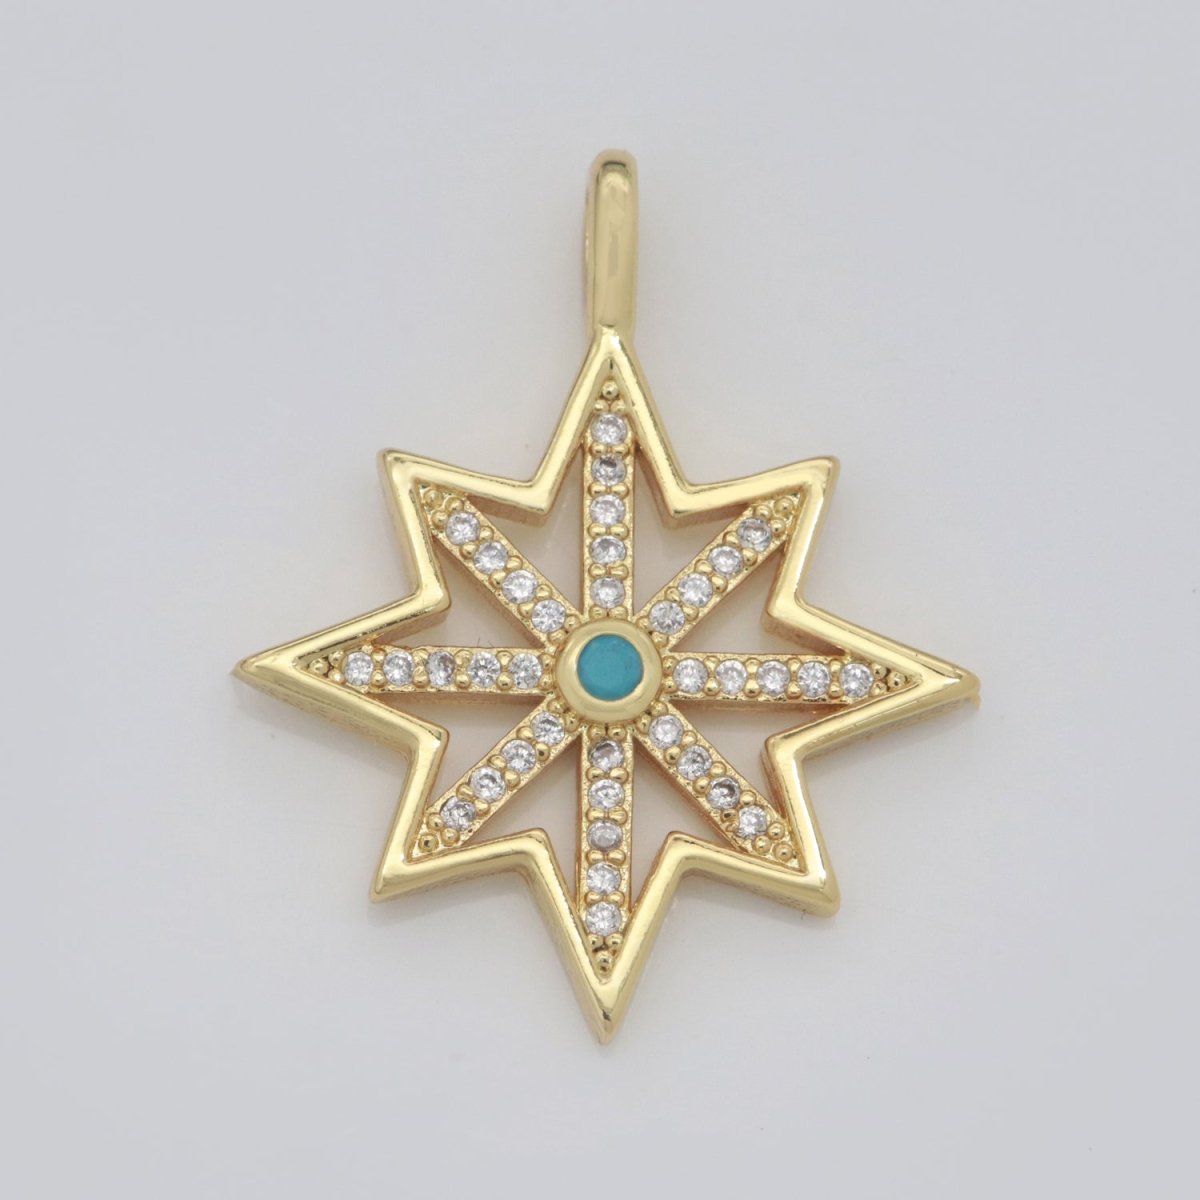 14k Gold Fill Micro Pave Star Charm, Turquoise North Star Celestial Pendant Charm For DIY Necklace Bracelet Earring N-1383 - DLUXCA